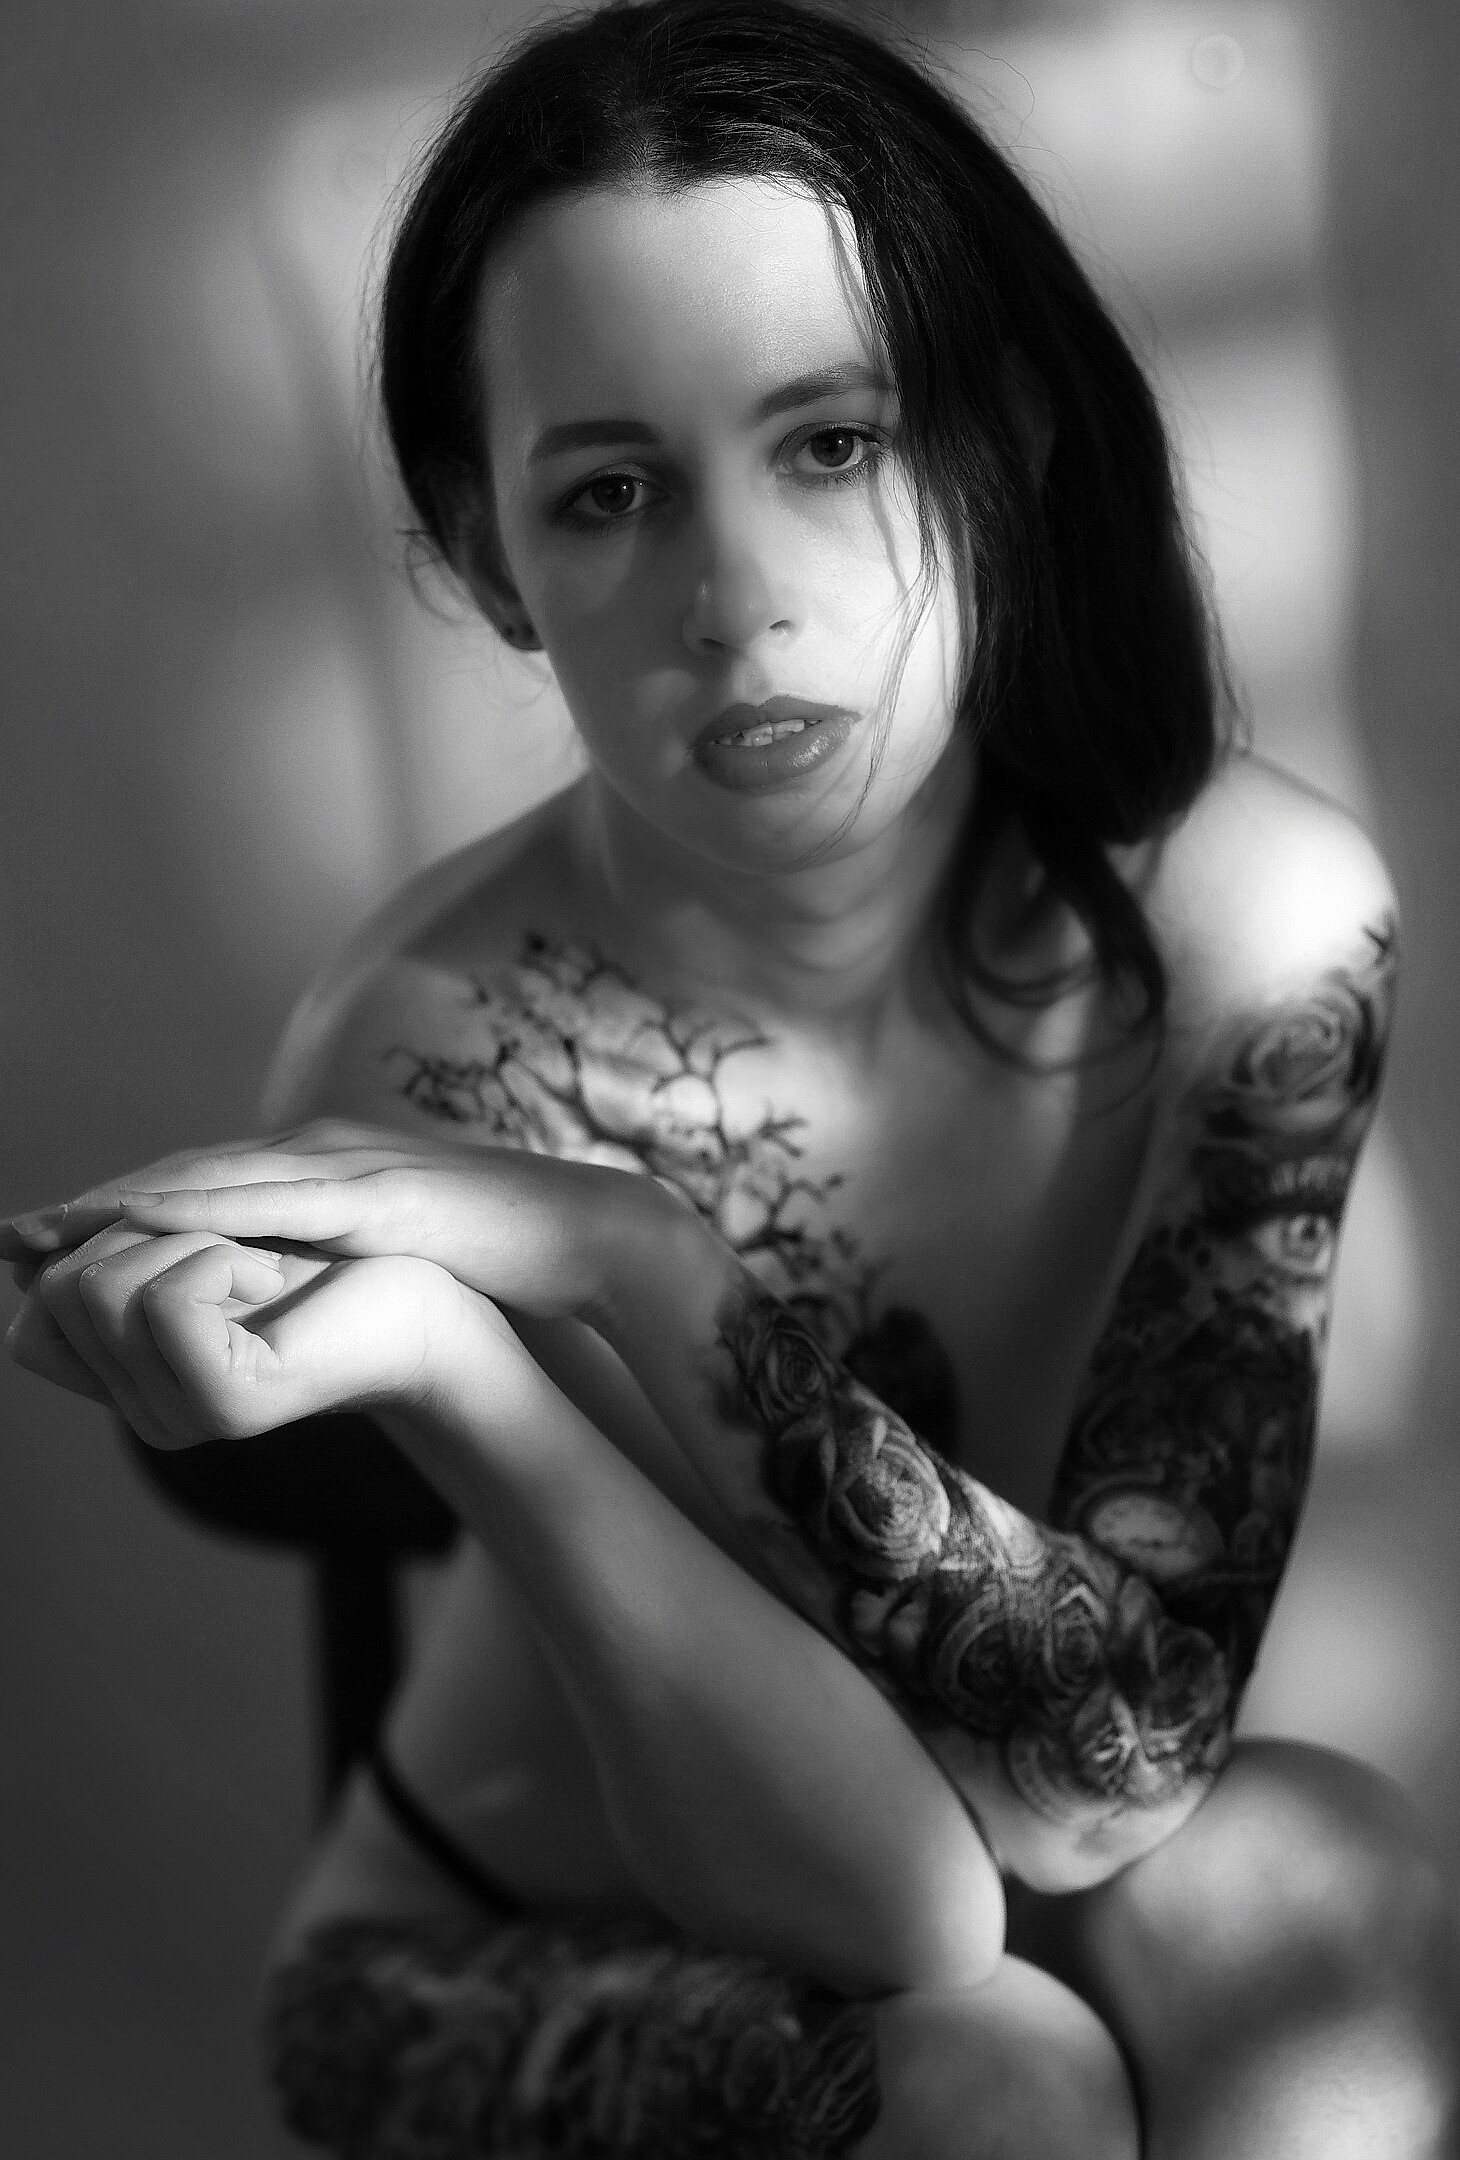 Girl with a Tattoo